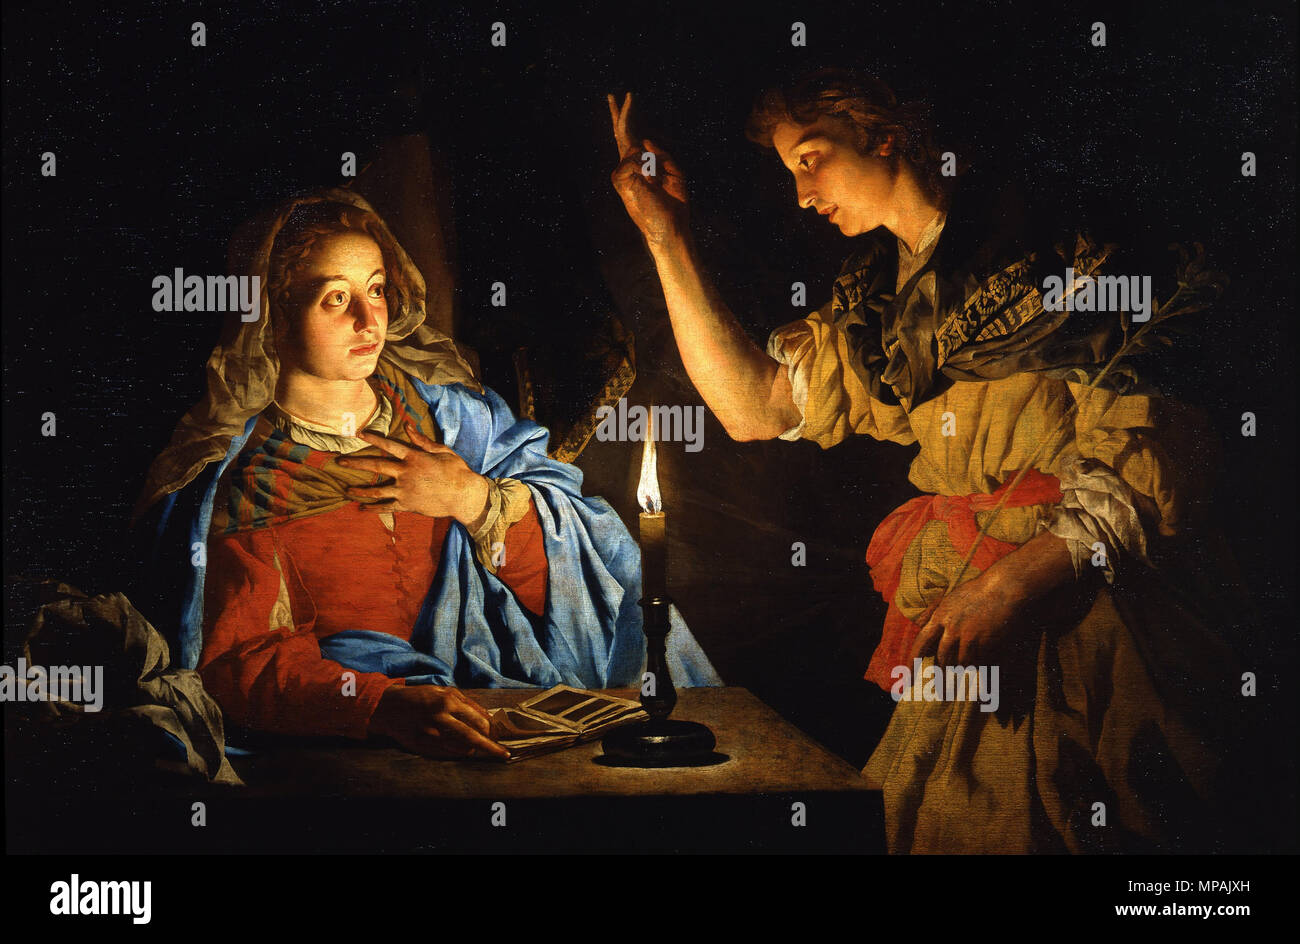 The Annunciation   early 17th century.   876 Matthias Stomer - Annunciazione - Google Art Project Stock Photo